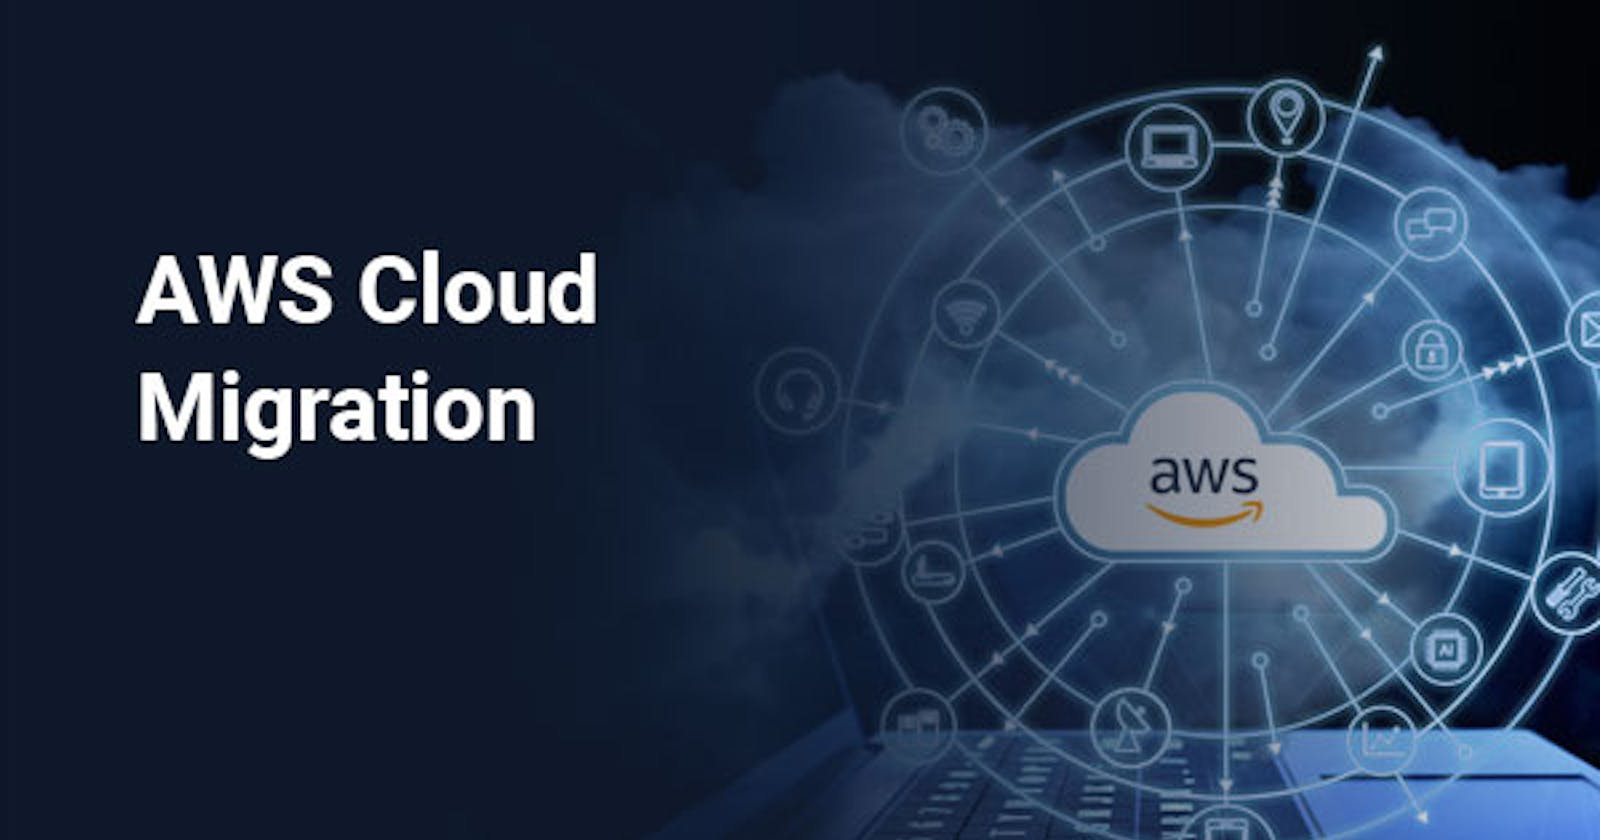 What to consider when migrating to AWS? What can help you achieve your Migration goals?